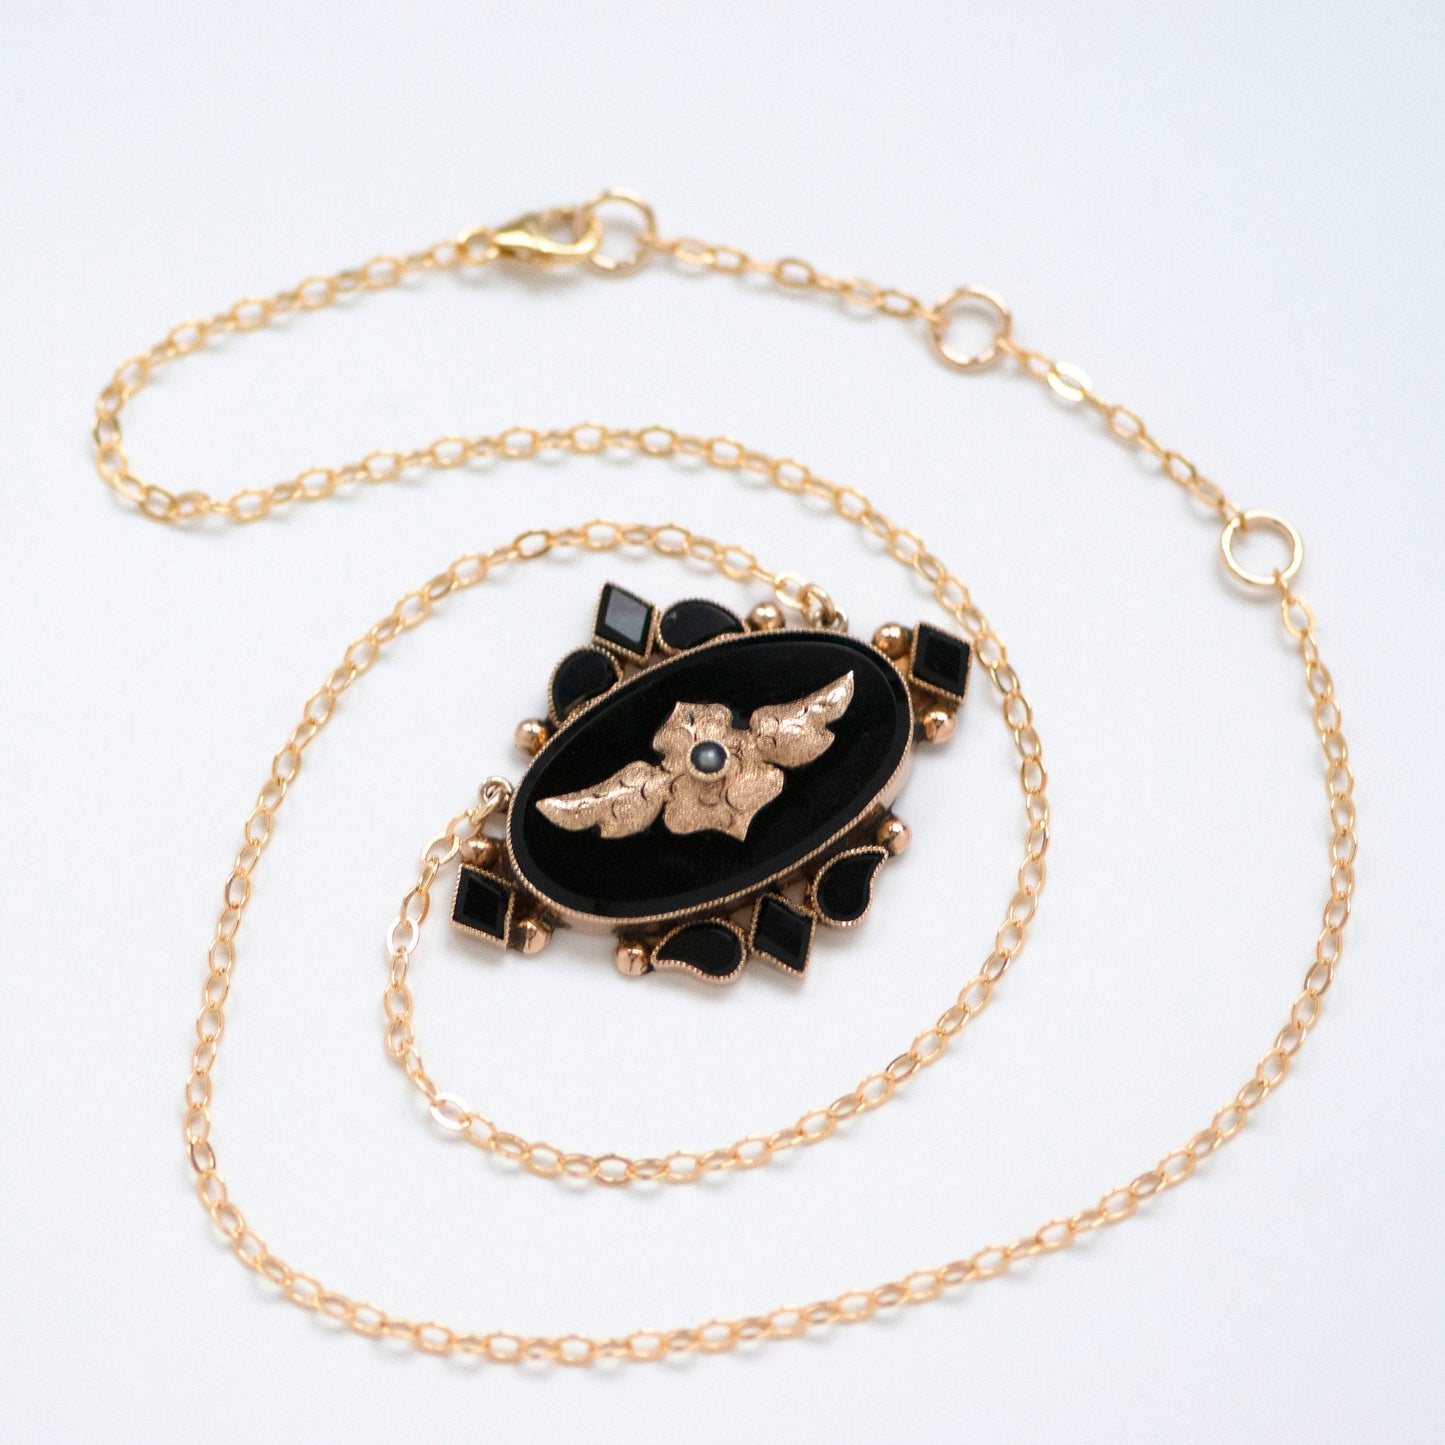 14k Gold Black Onyx Seed Pearl Necklace